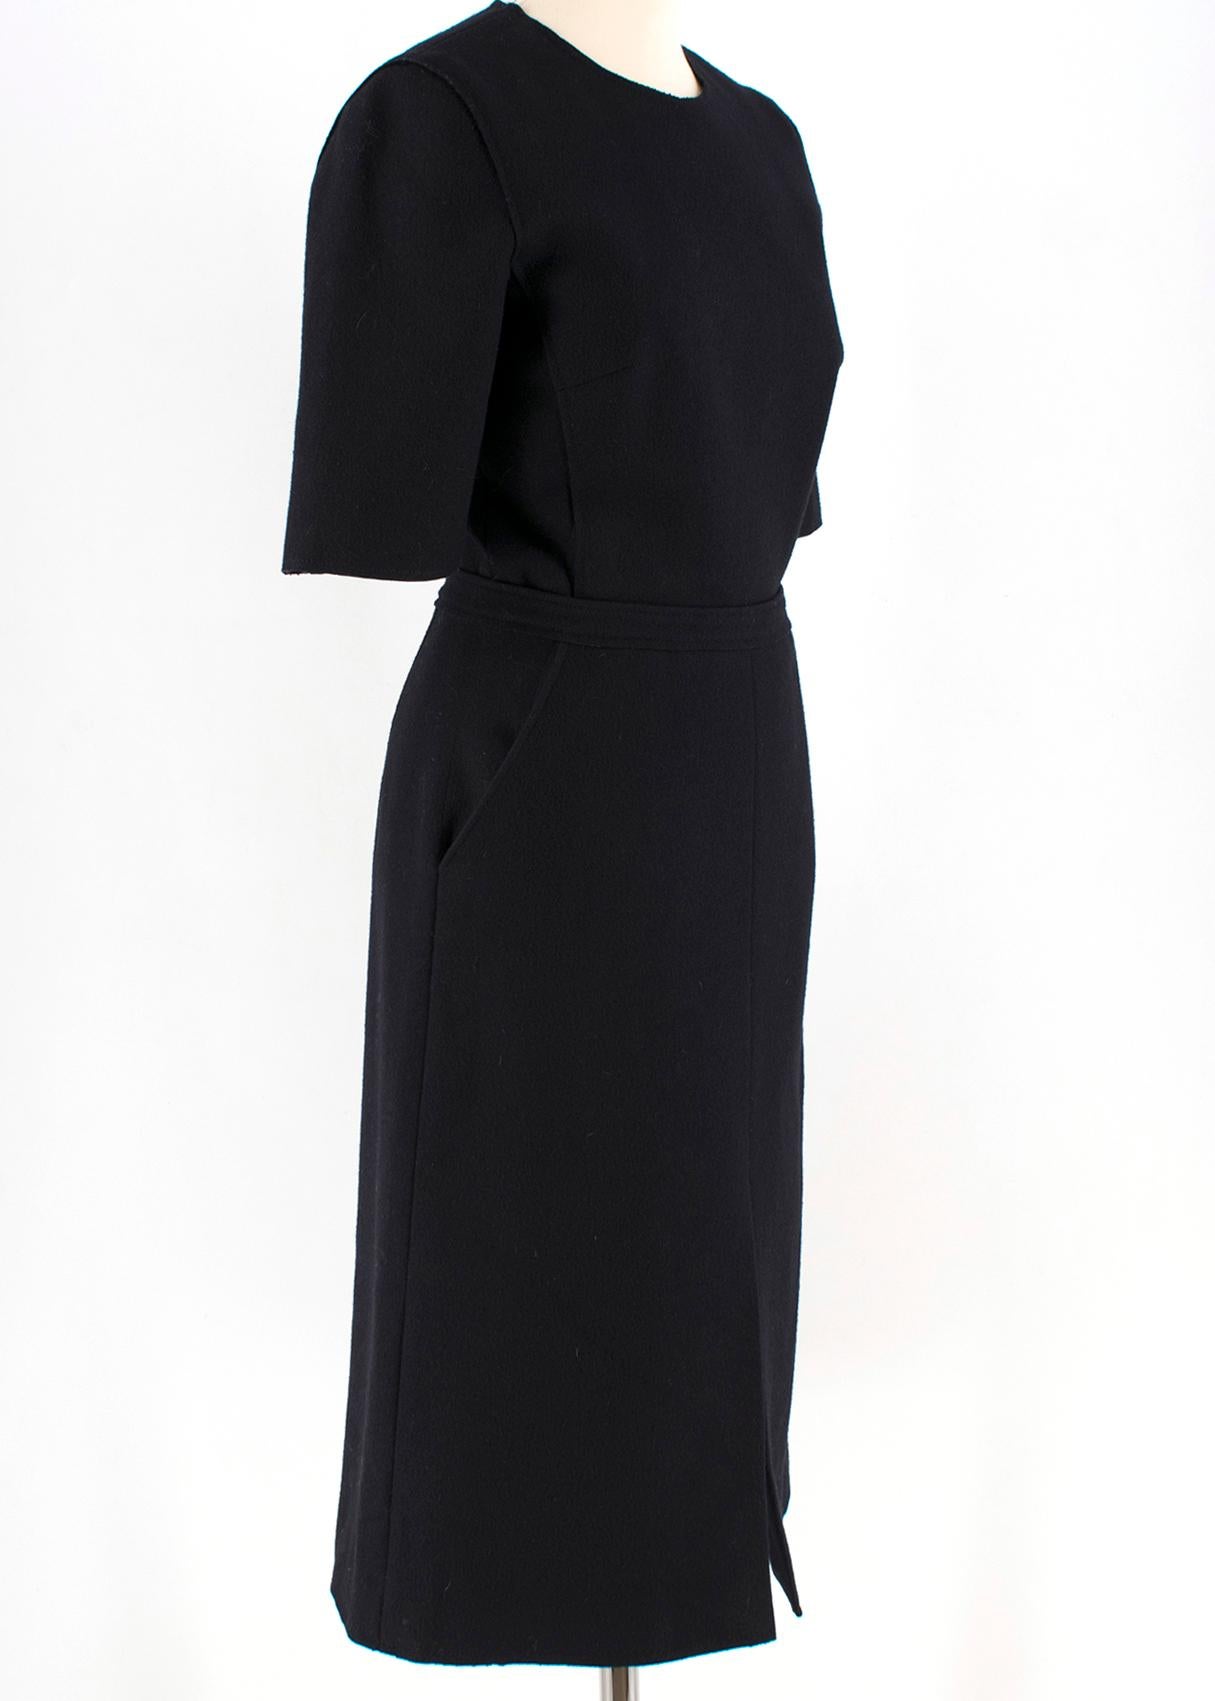 Victoria Beckham Wool Navy Shift Midi Dress

- navy wool midi dress
- shift bodycon silhouette
- short sleevs
- contrasting golden ton zip fastening to the back
- round neckline neckline 
- front cutout to the bottom 
- two front slip pockets